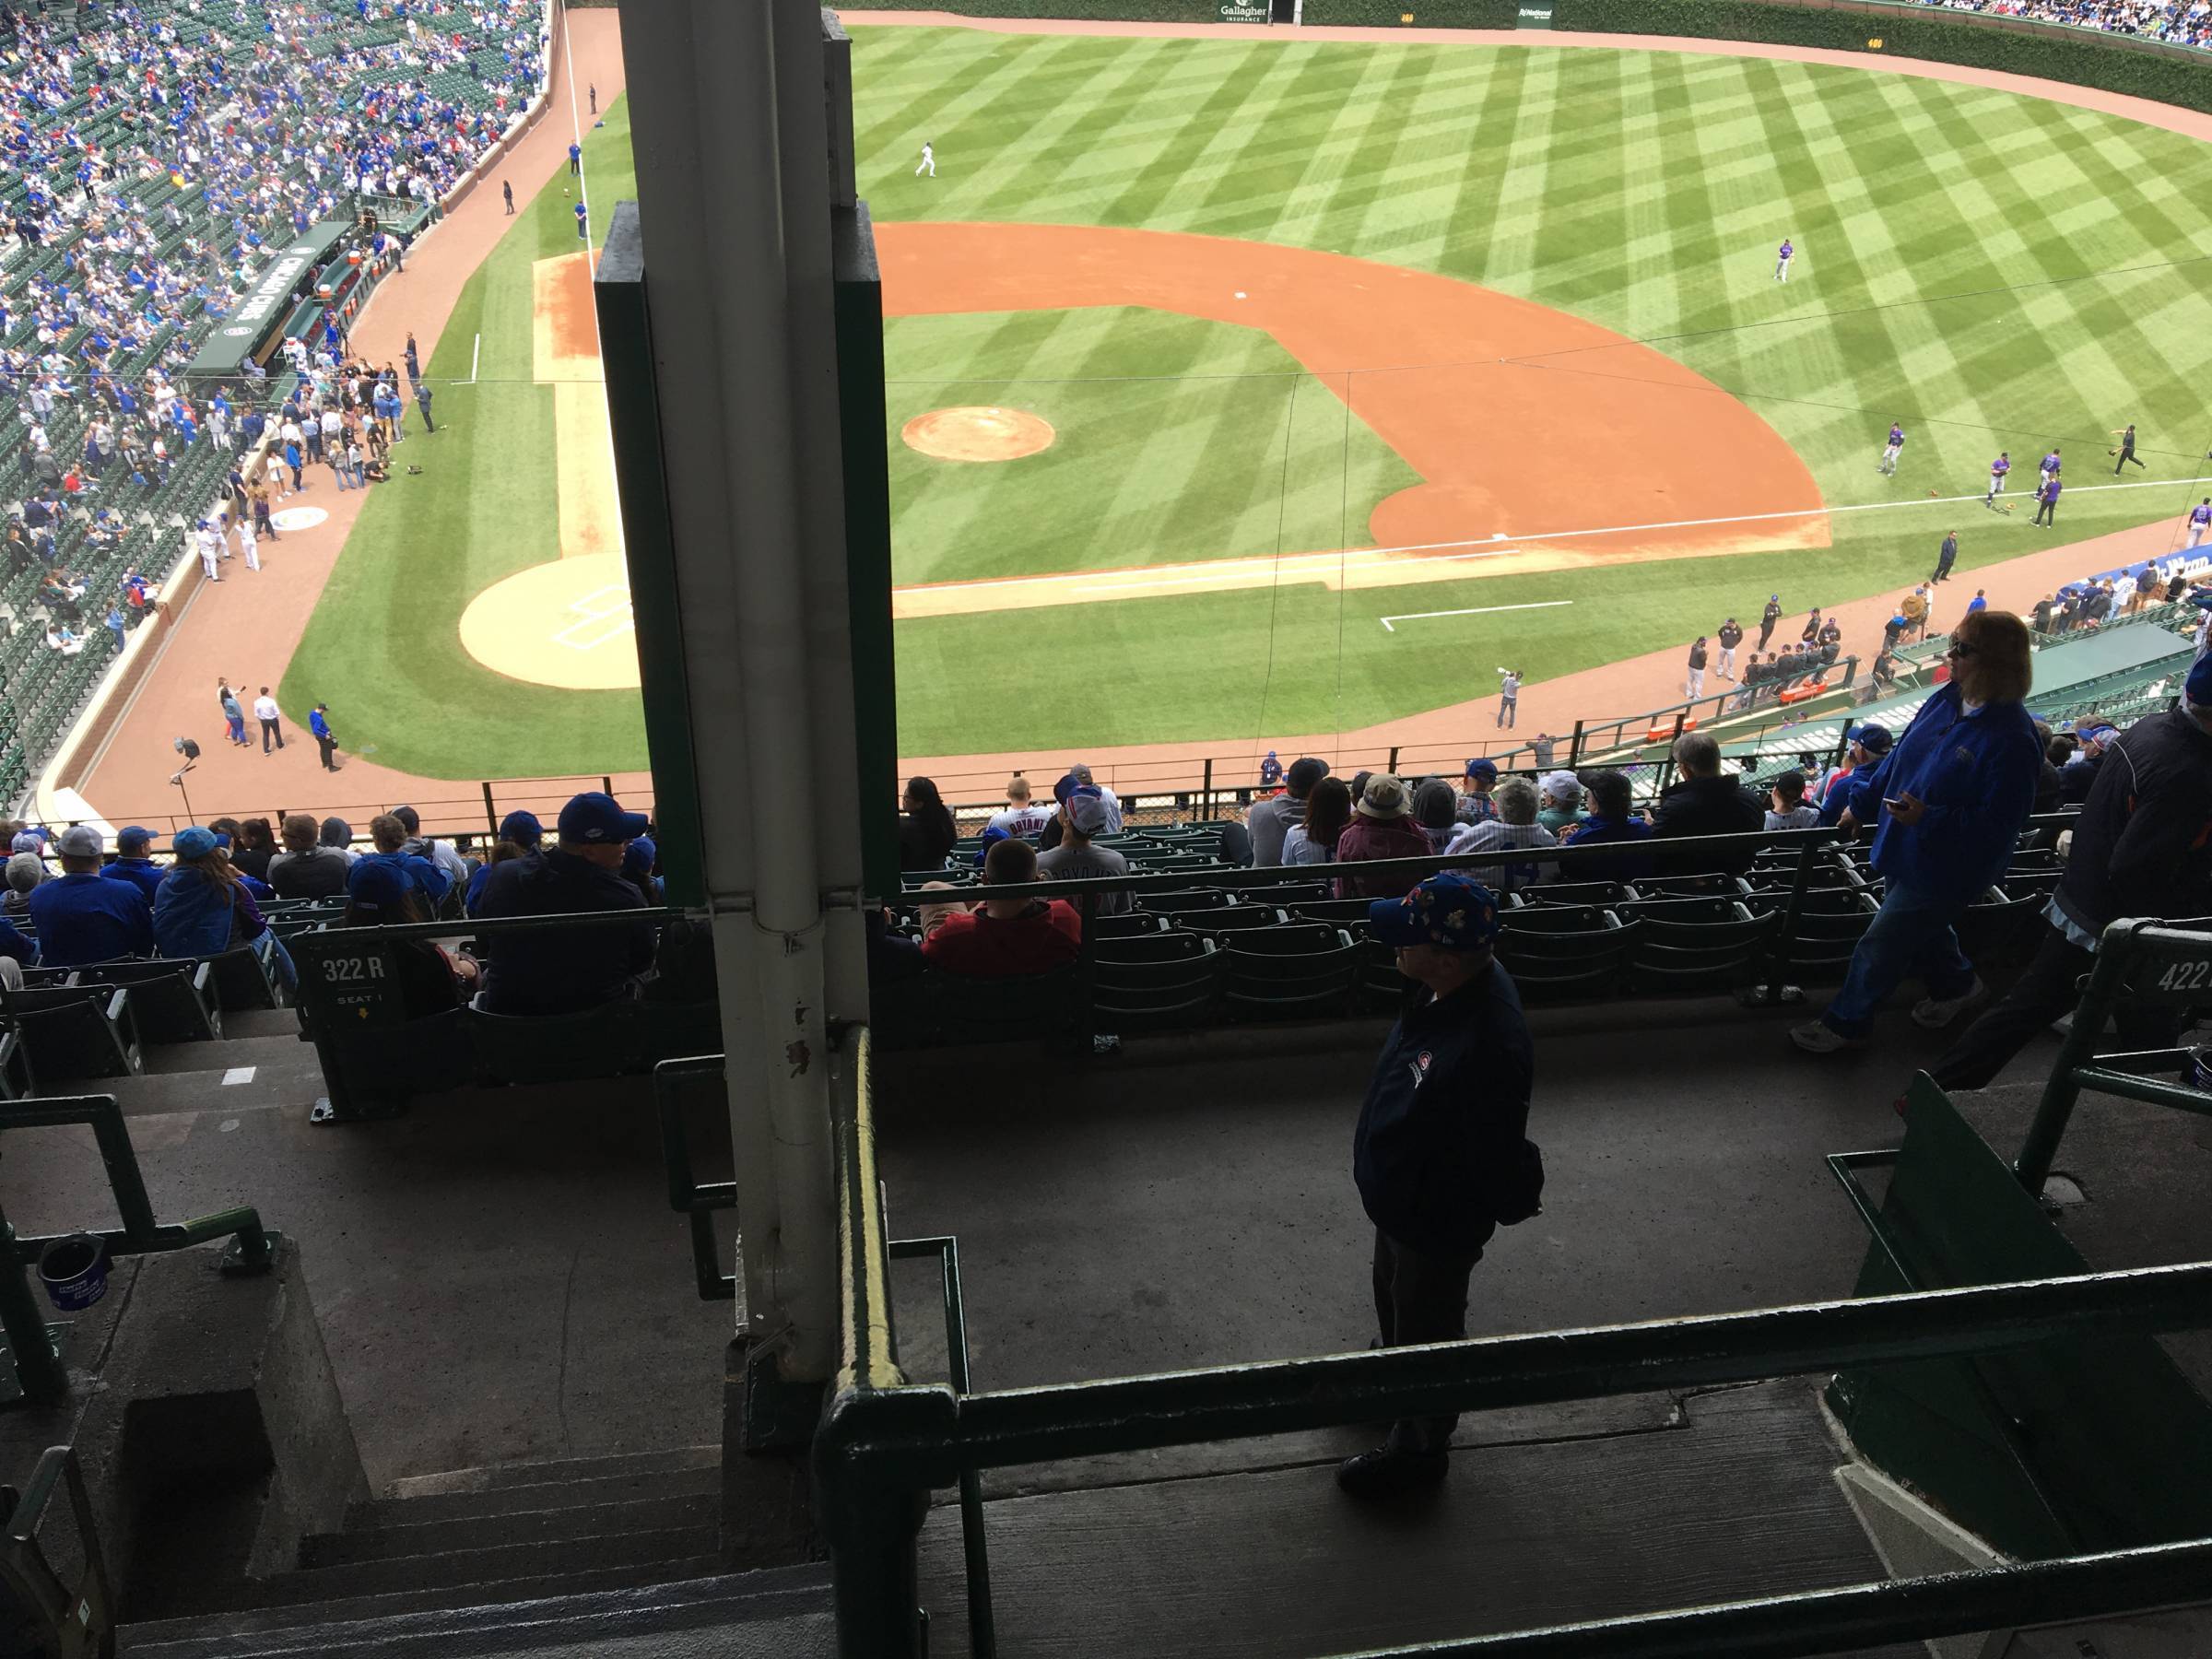 Pole in Section 422R at Wrigley Field